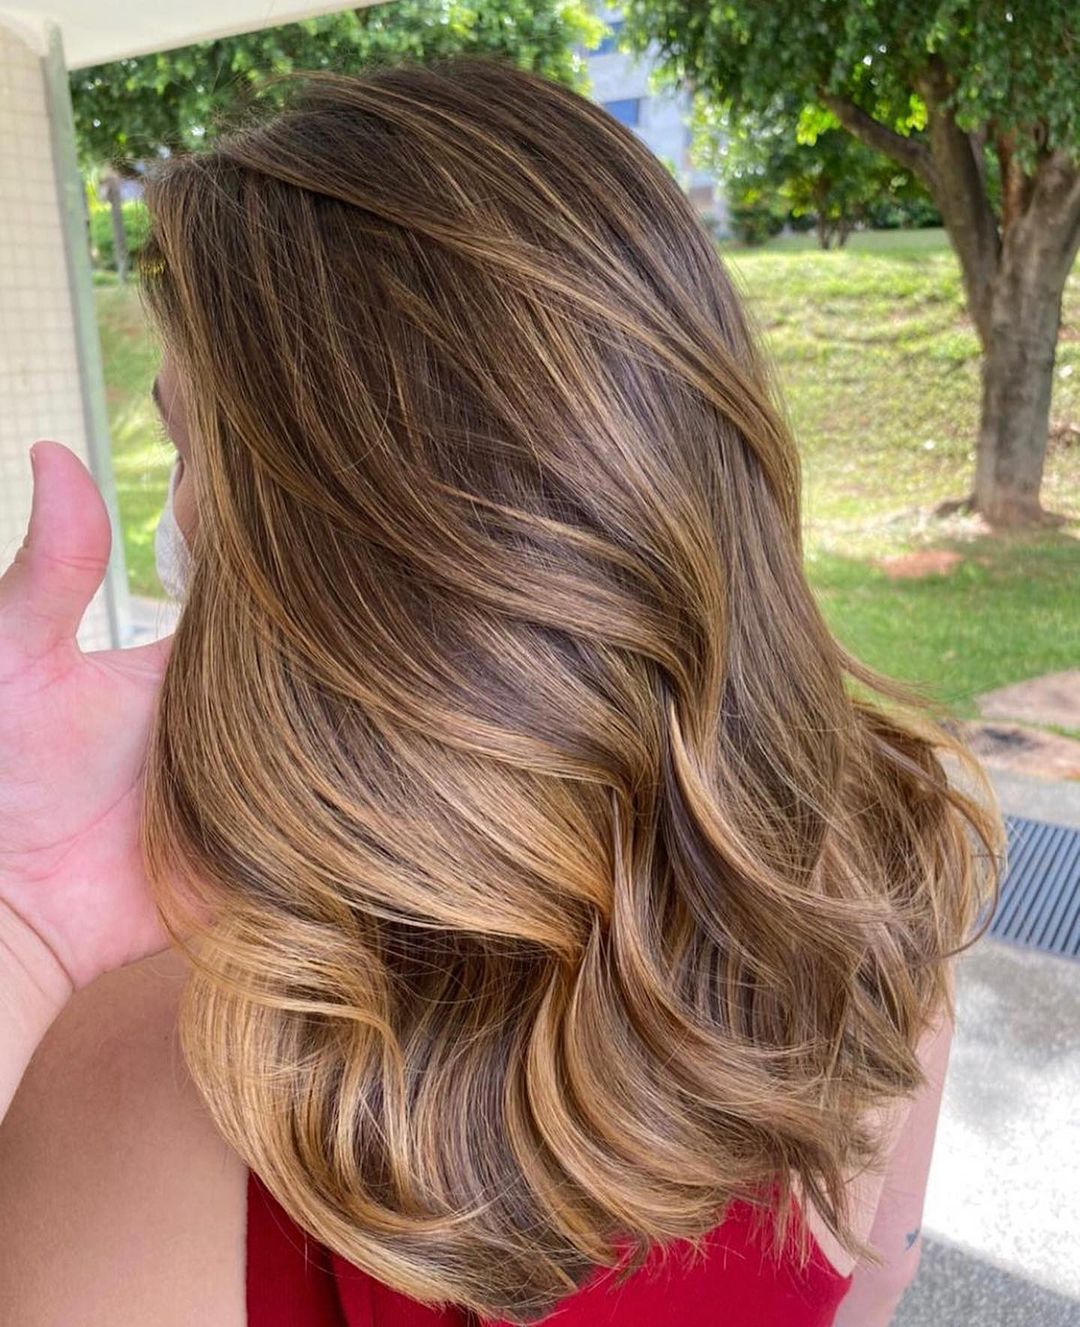 50+ Inspiring Caramel Hair Color Ideas to Spice Up Your Standards